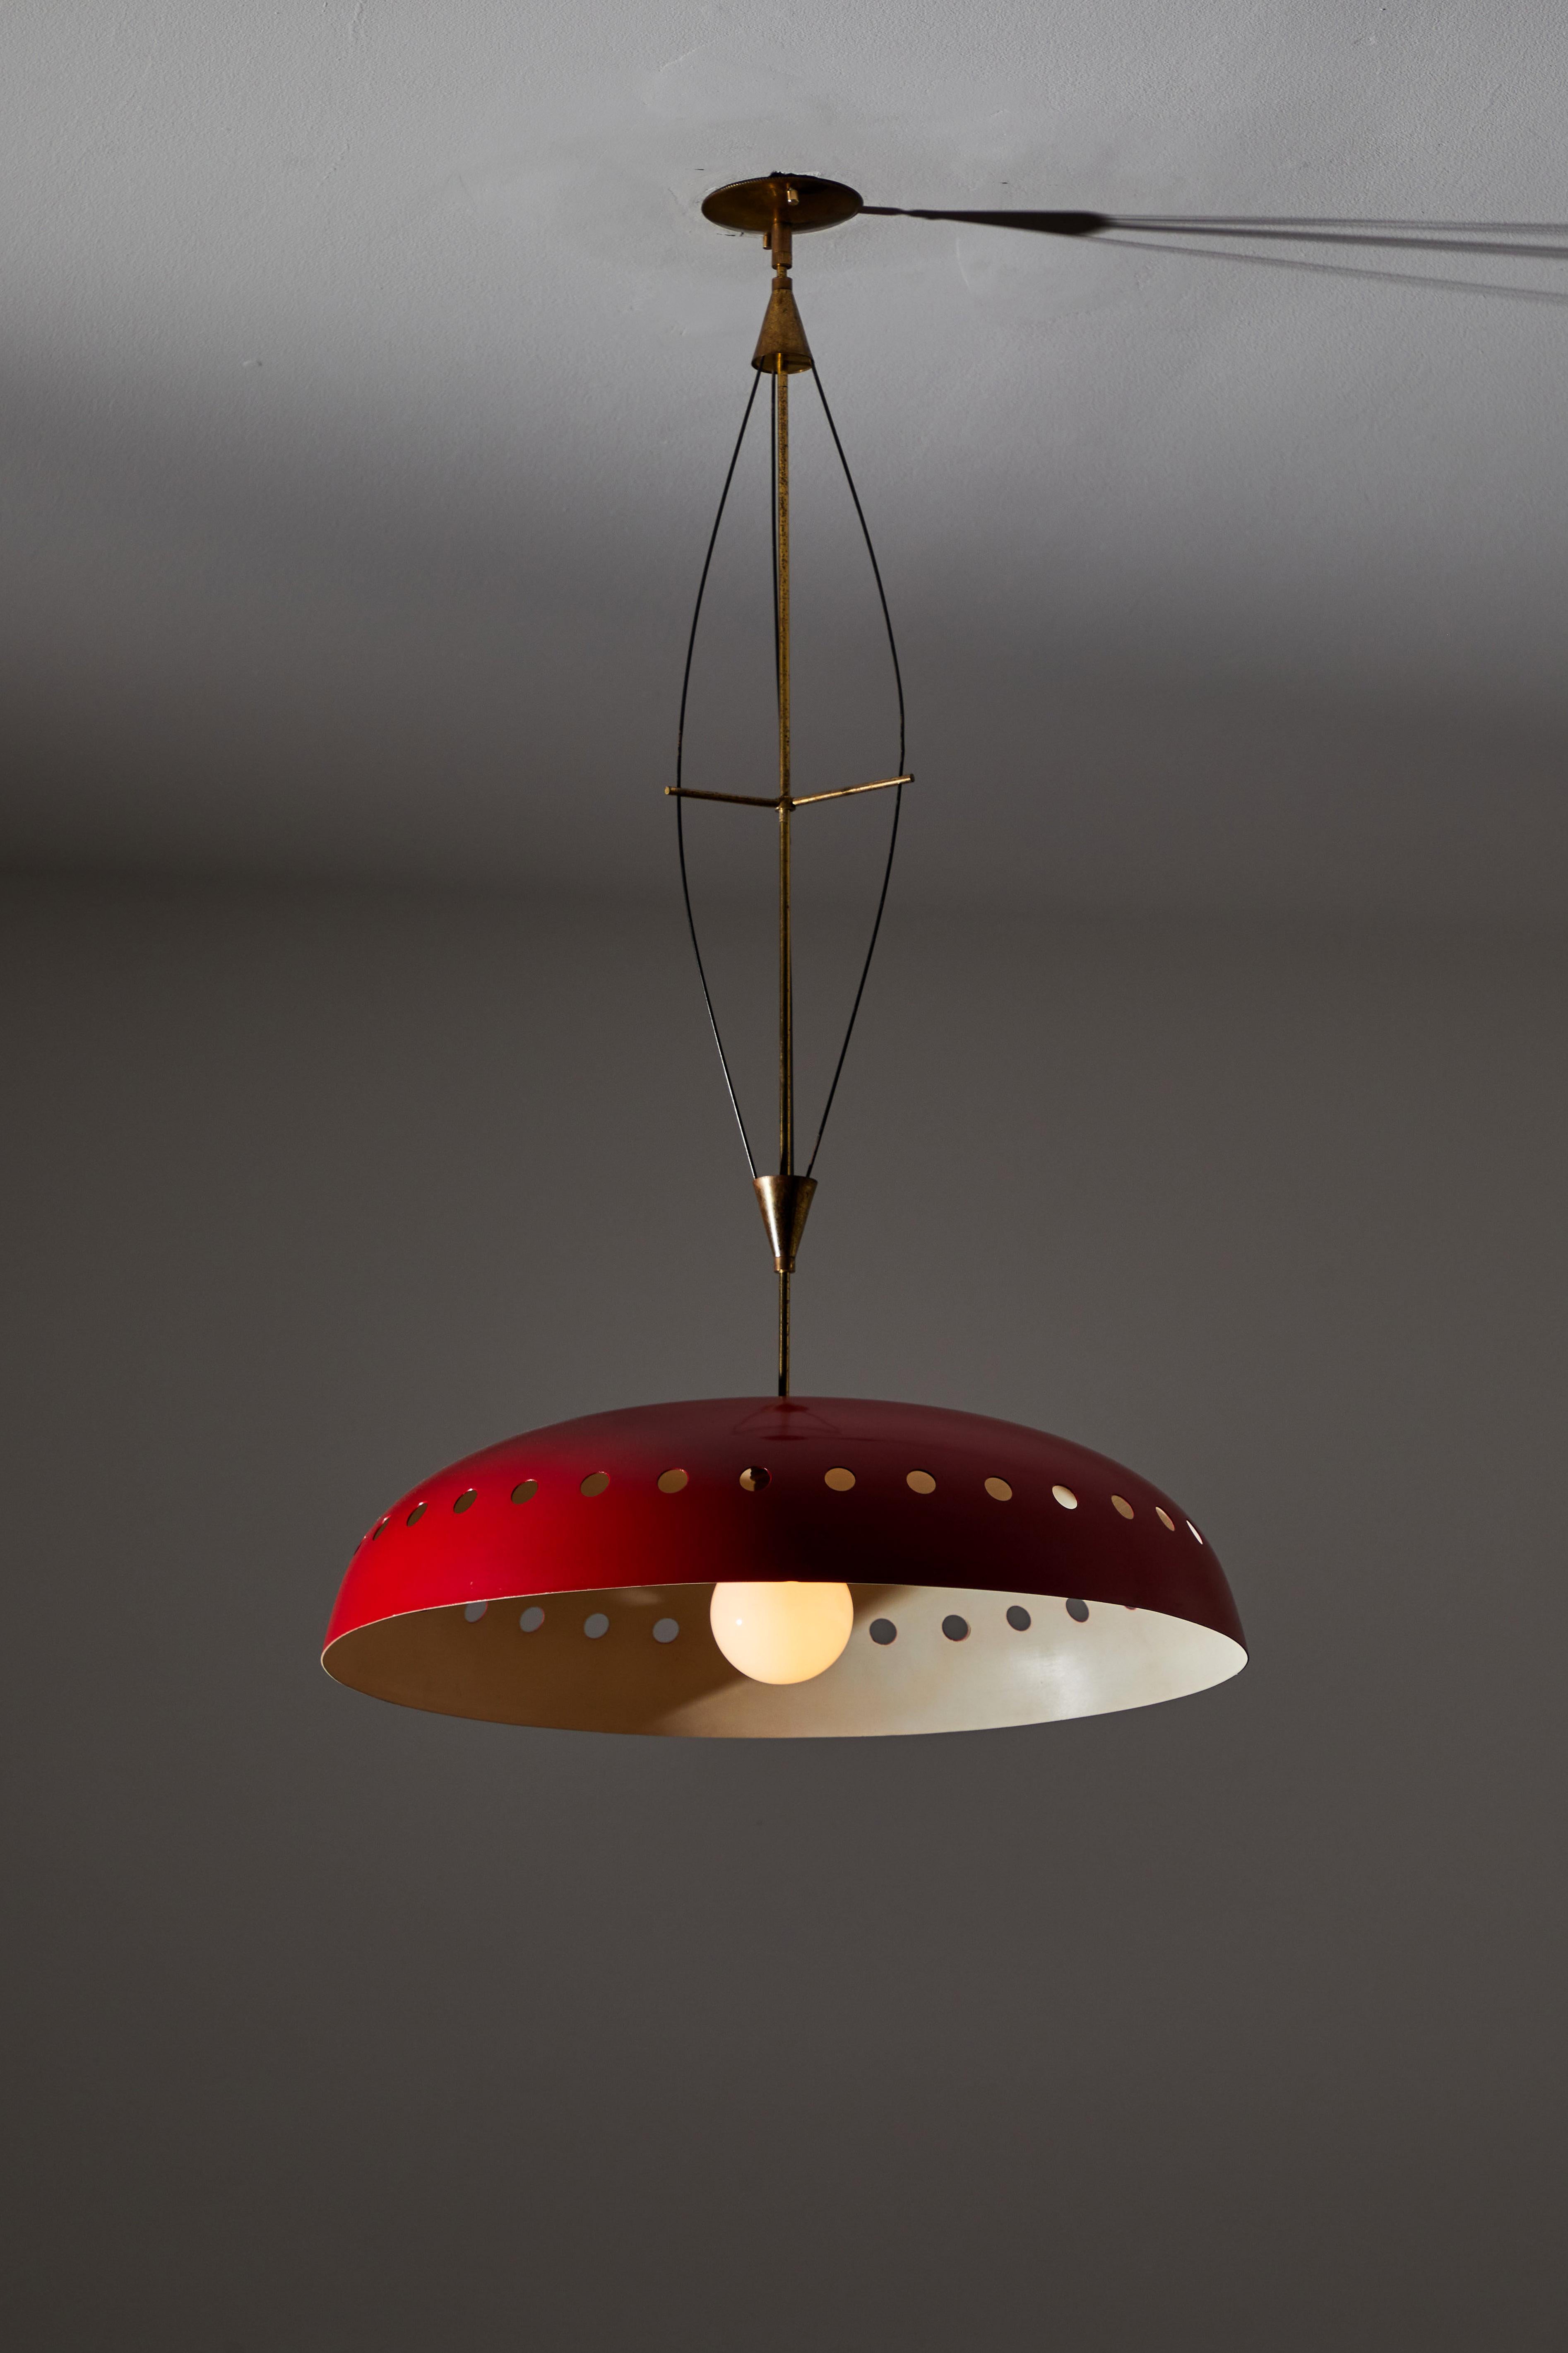 Suspension light manufactured in Italy, circa 1950s. Original painted aluminum, brass. Custom brass ceiling plate. Rewired for U.S. standards. We recommend one E26 100w maximum bulb. Bulbs provided as a one time courtesy.